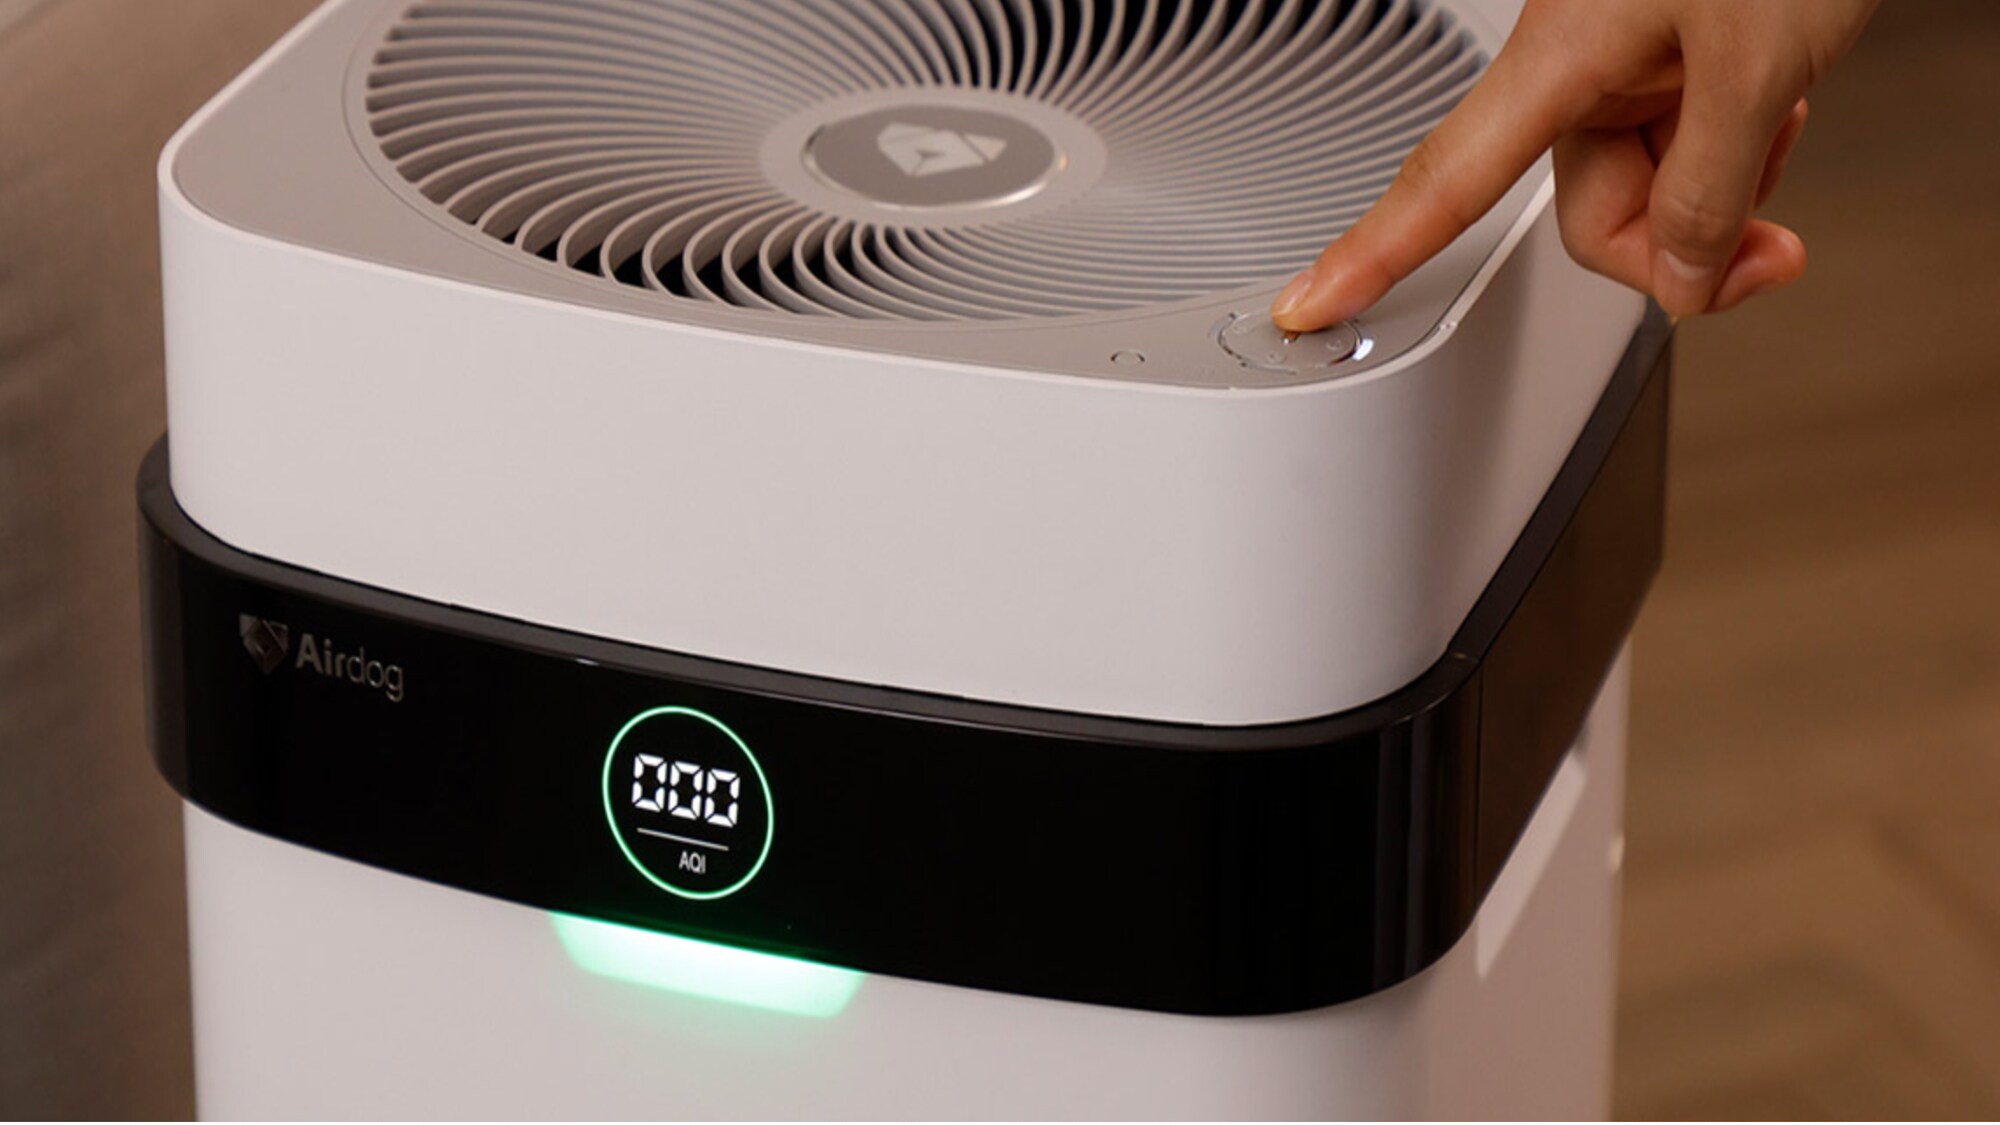 [Airdog] Rooms with open-air baths and single terrace rooms are equipped with air purifiers.